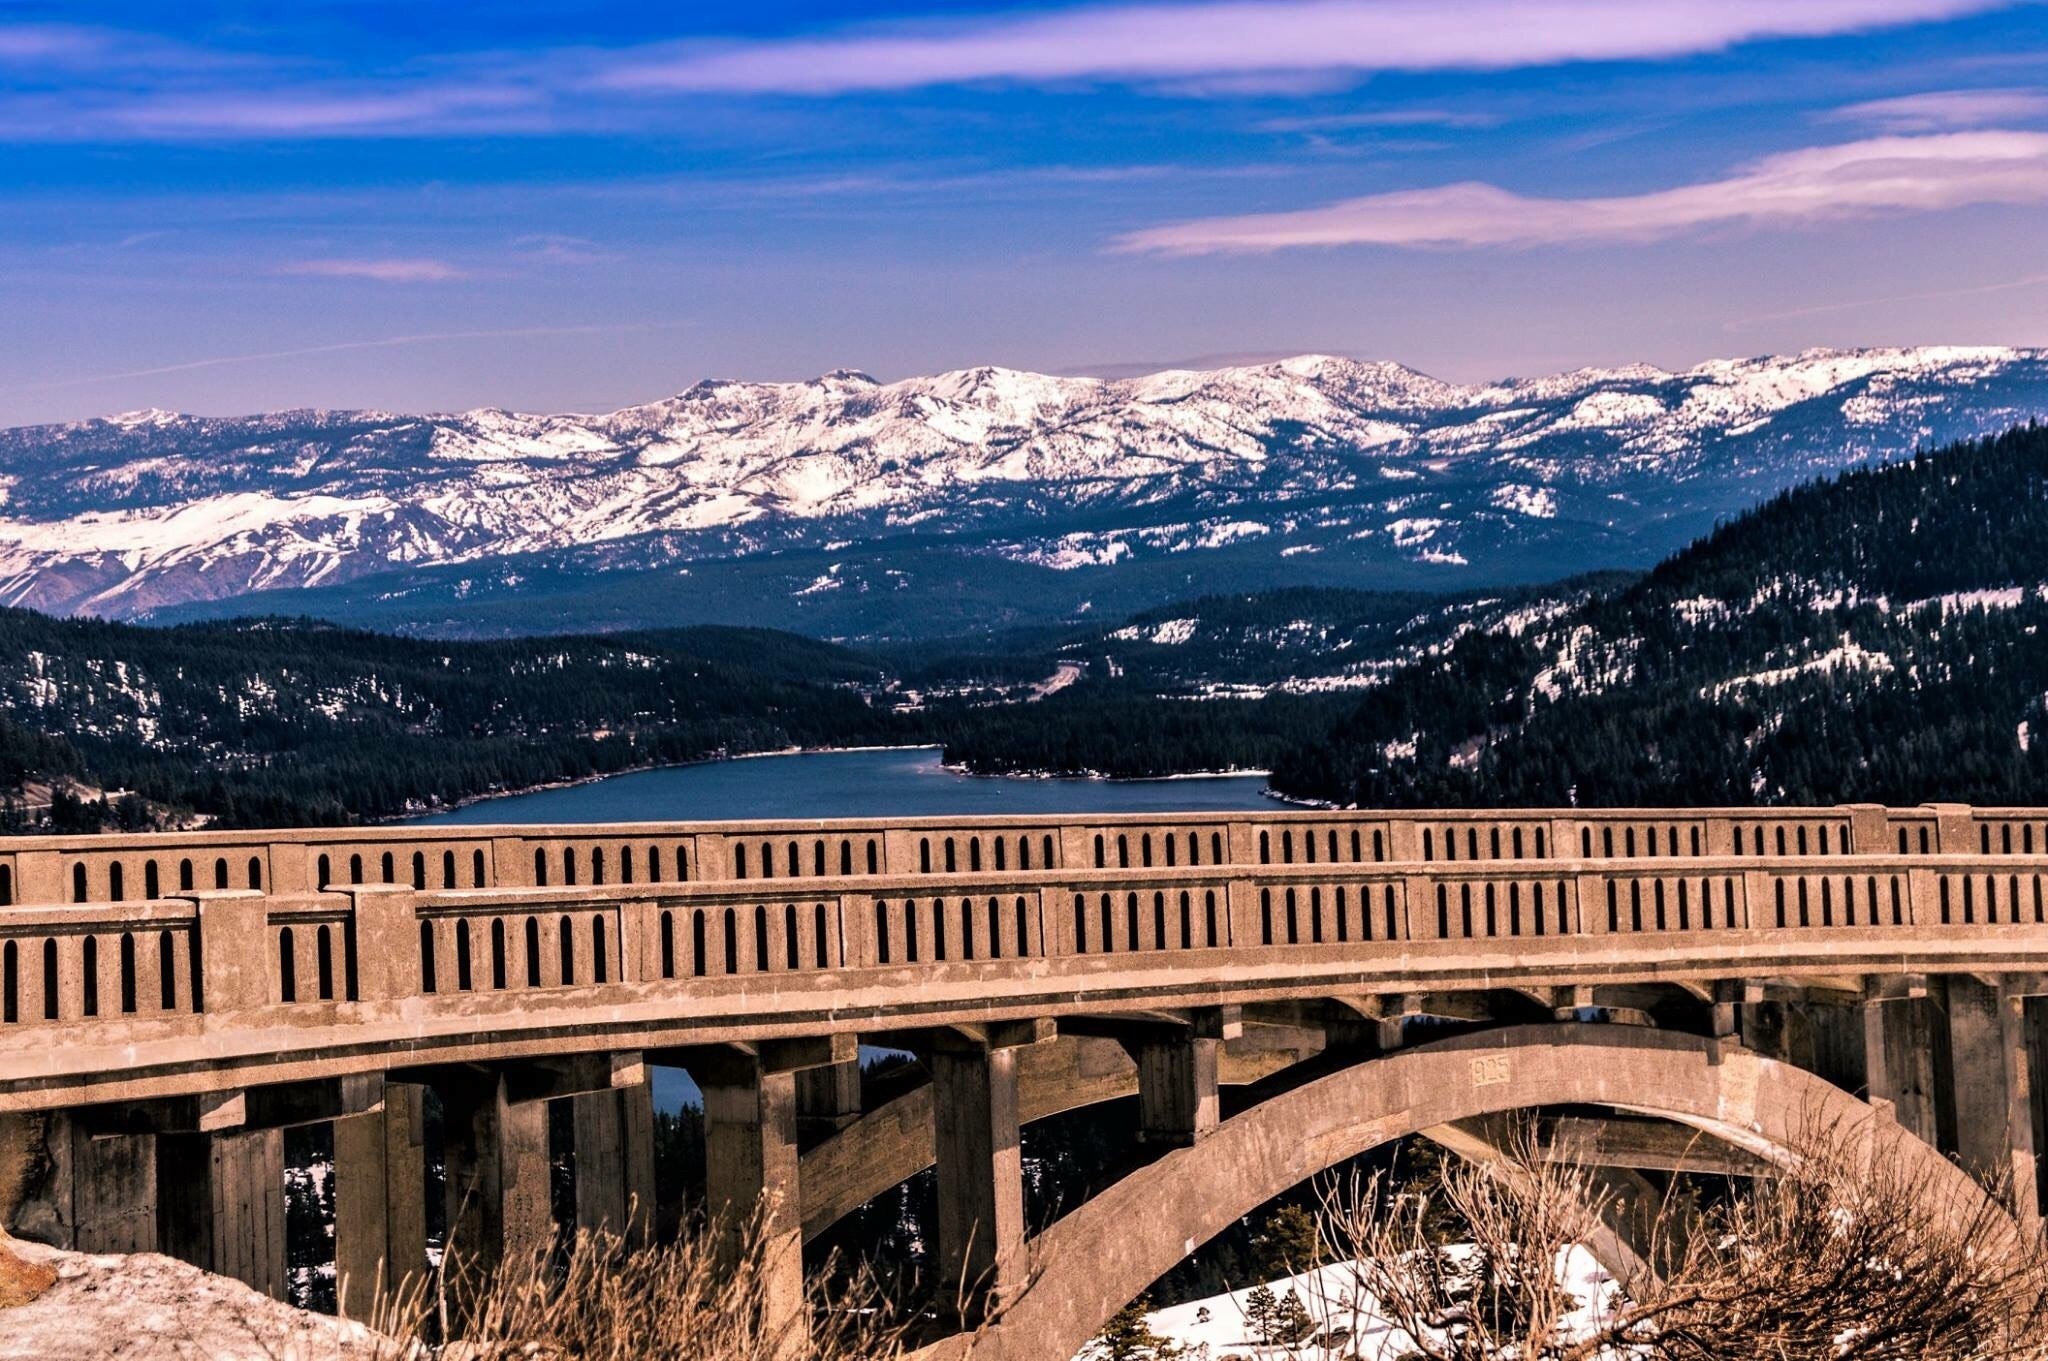 Looking out over the bridge out to Lake Tahoe and the mountains in the background so magnificent!!